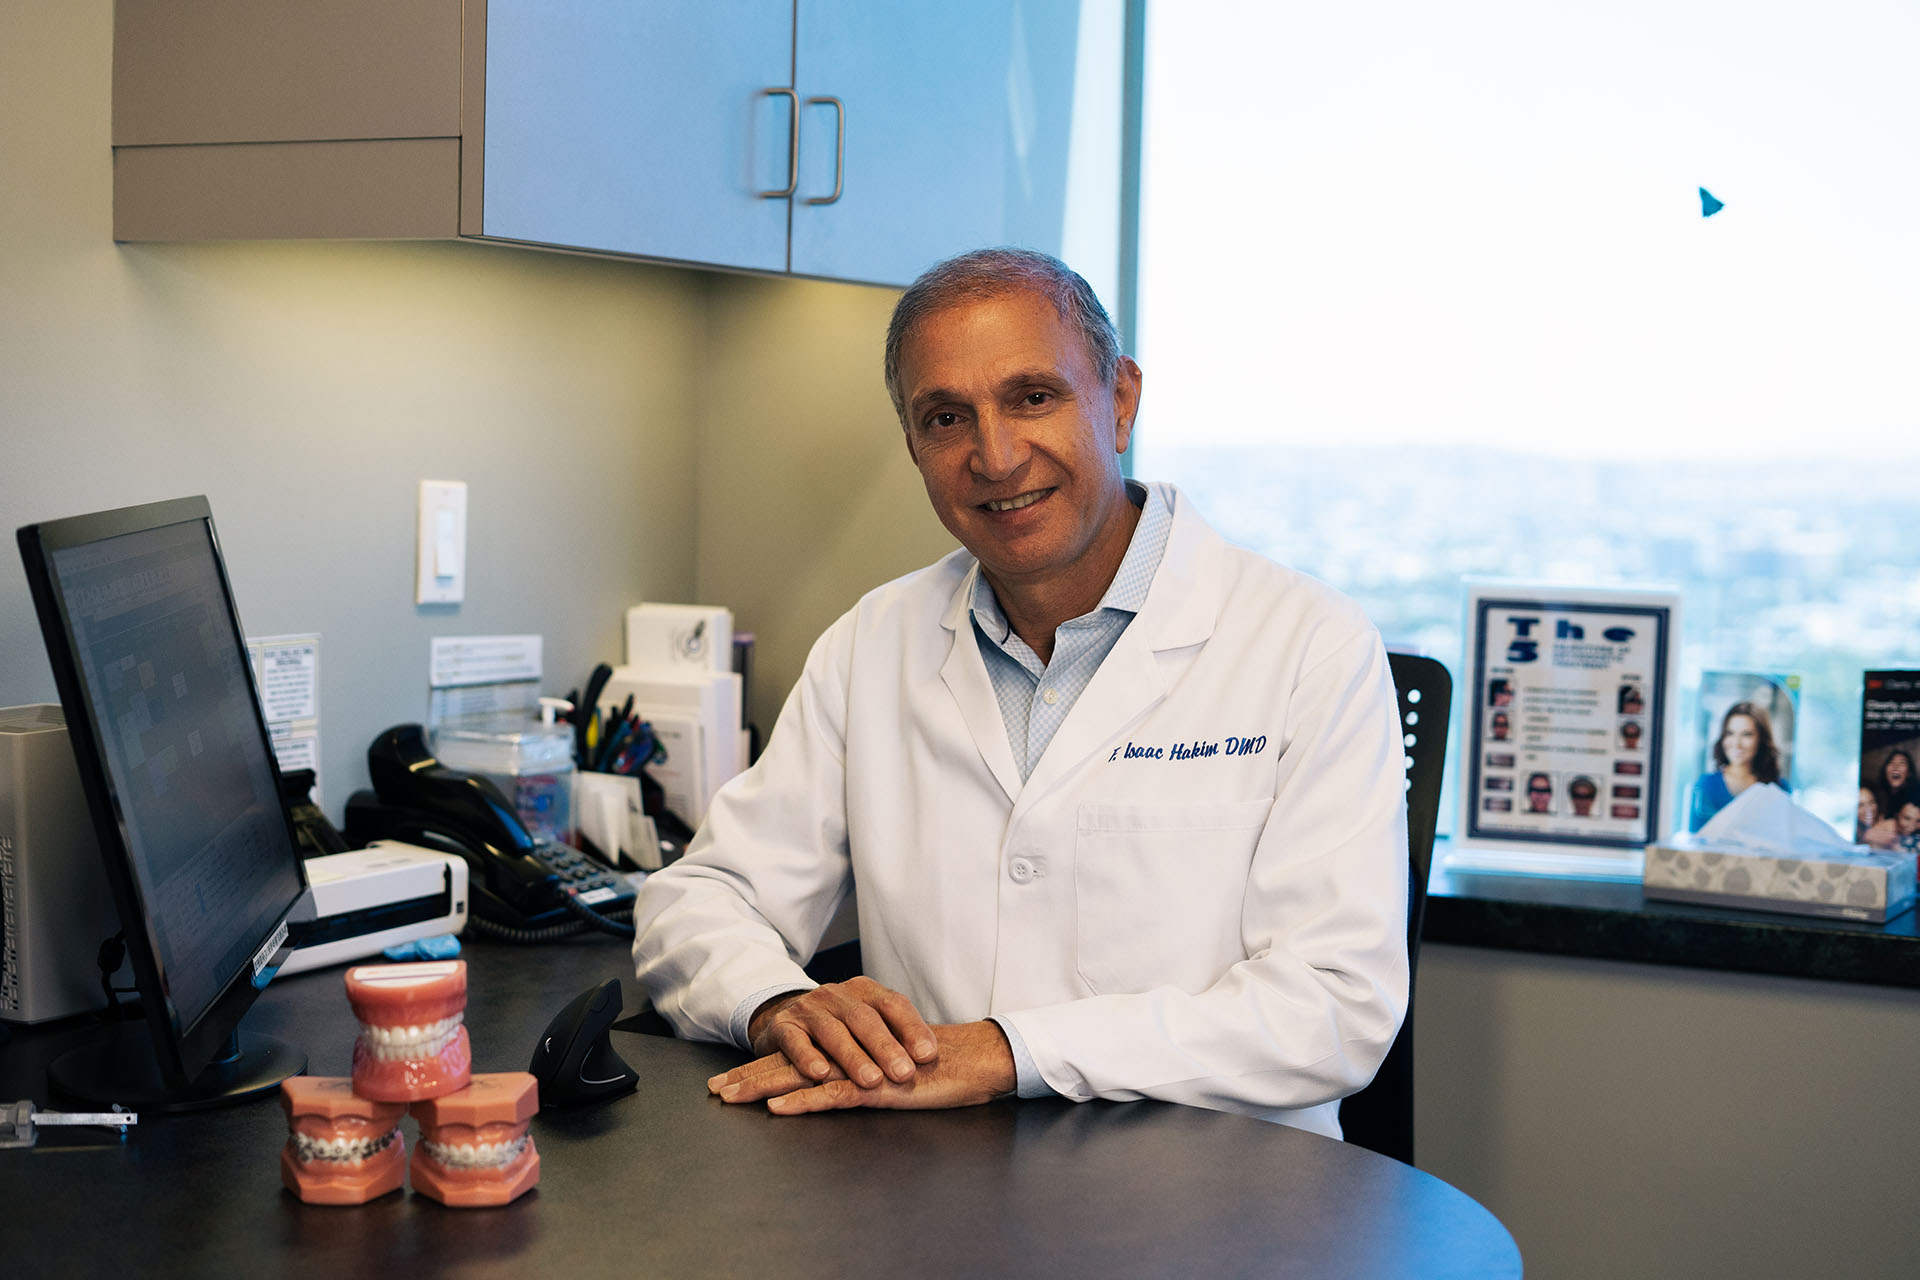 Dr F Isaac Hakim at his desk Brentwood, Los Angeles